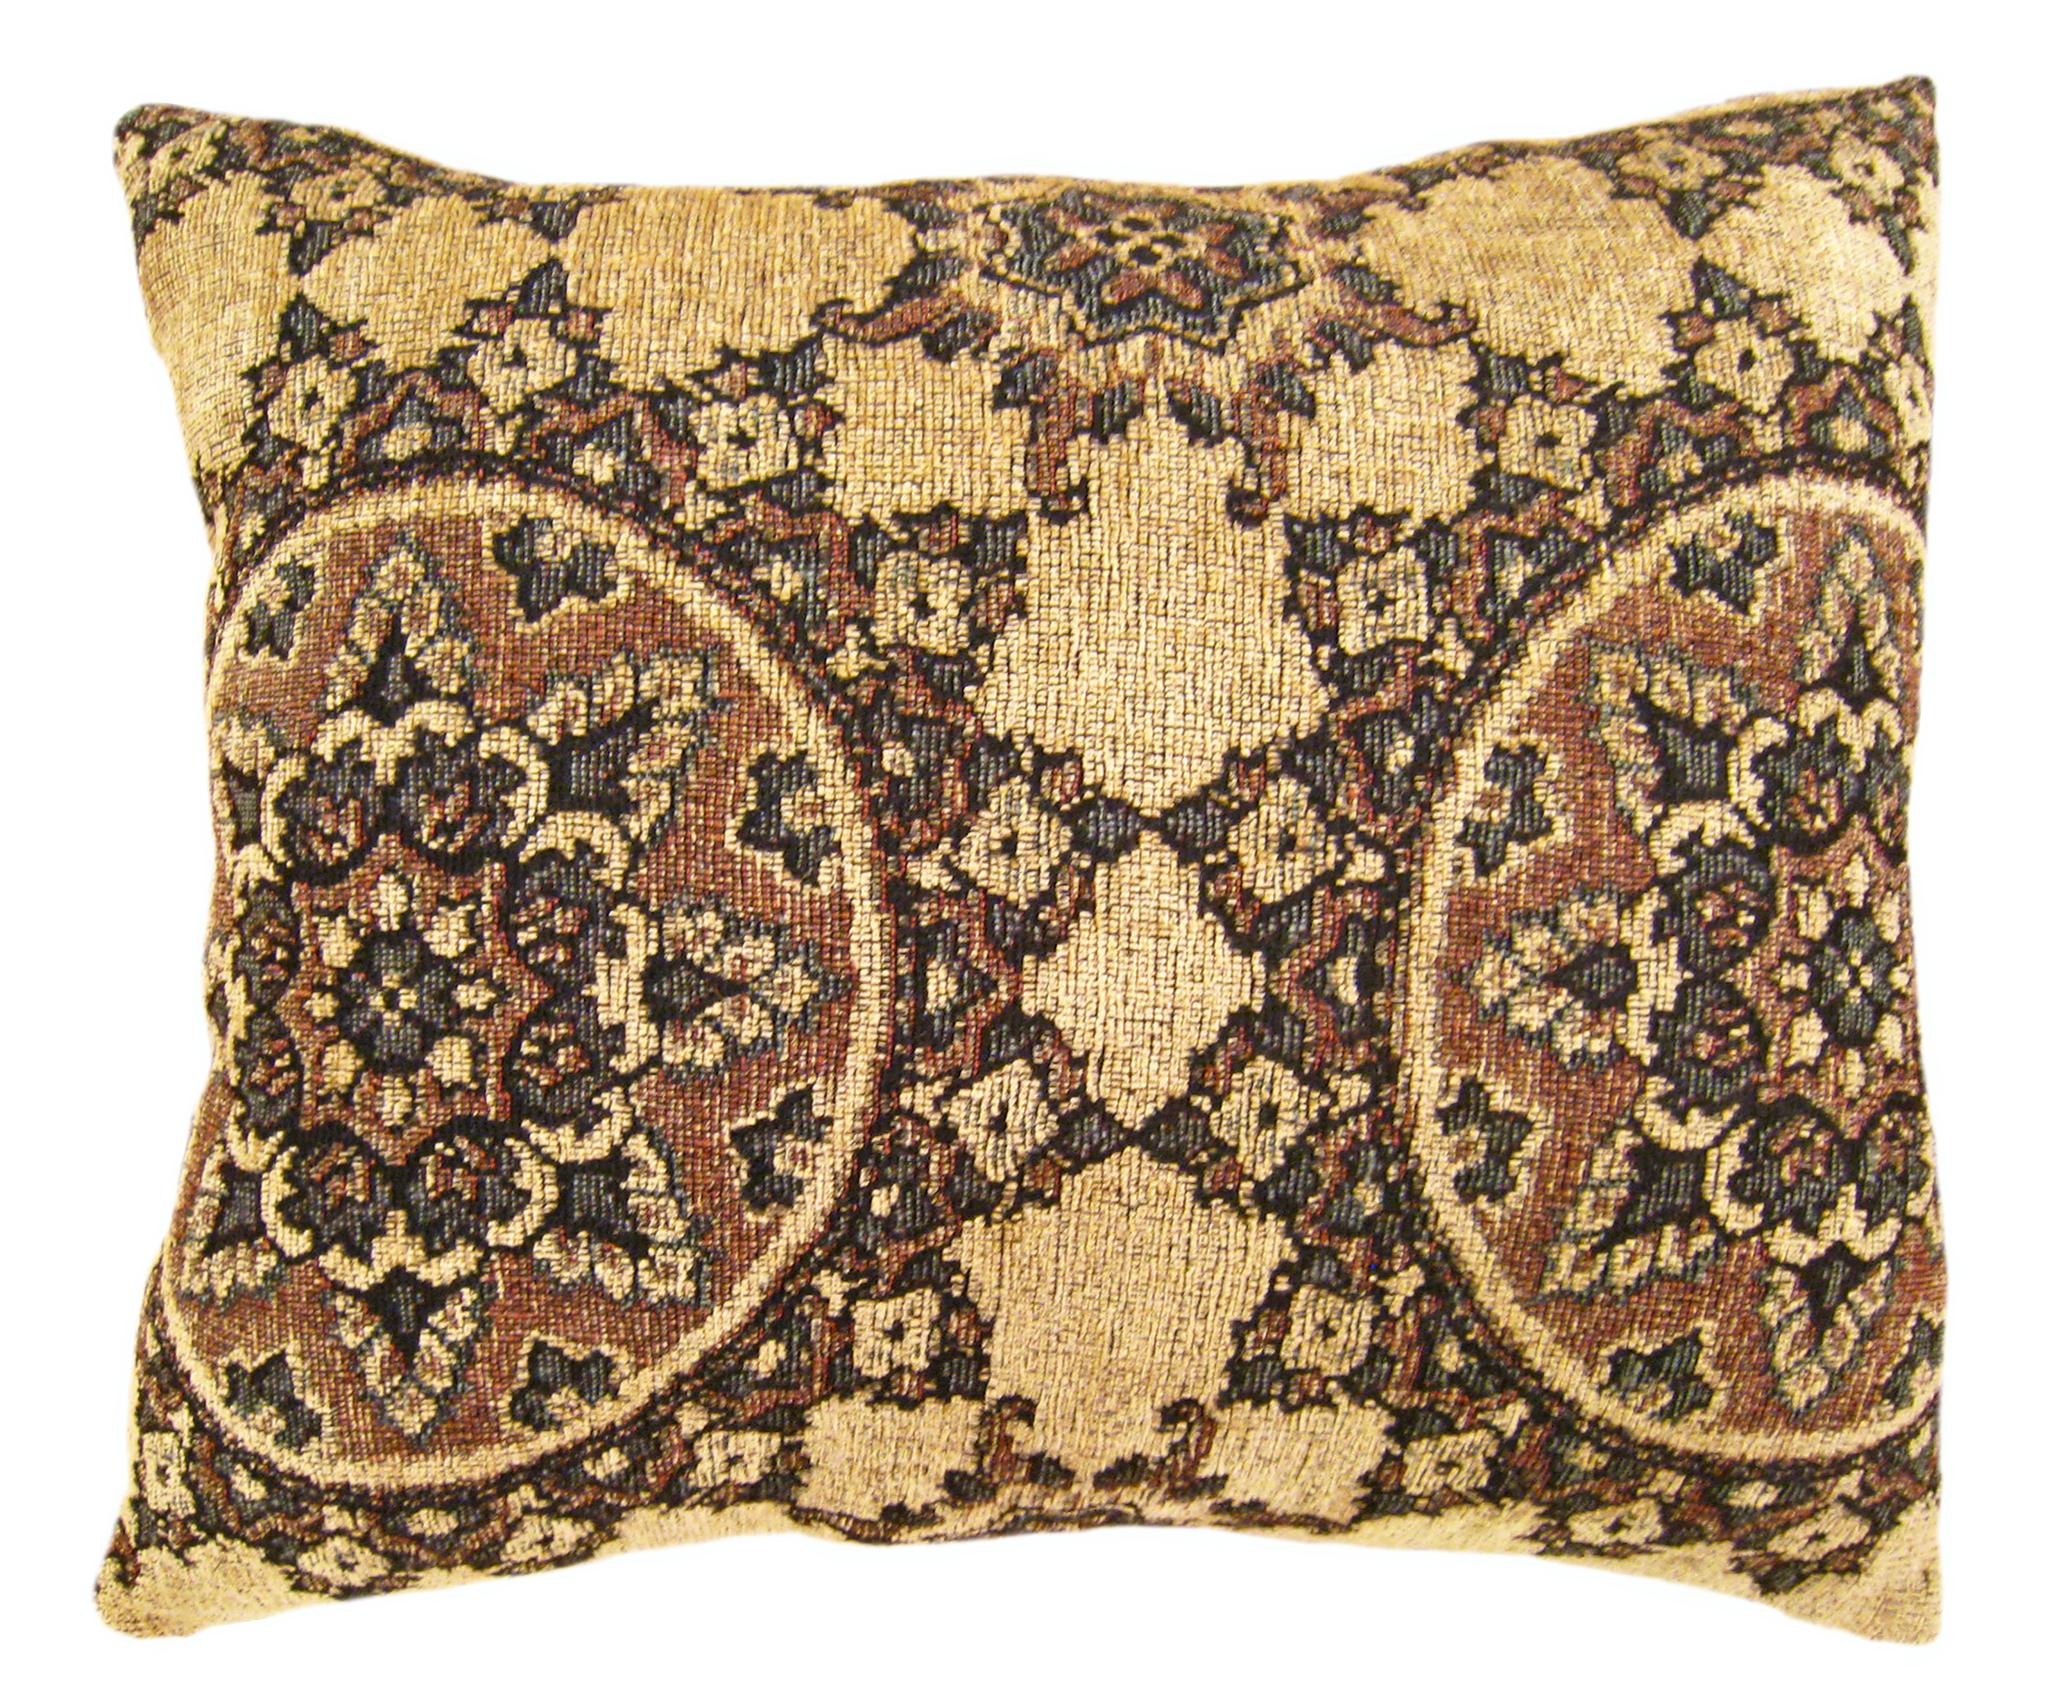 Vintage American taperstry circle rug pillow; size 20” x 18”.

A vintage decorative pillow with circles design motif in a brown central field, size 20” x 18”. This lovely decorative pillow features an antique rug on front which is characterized by